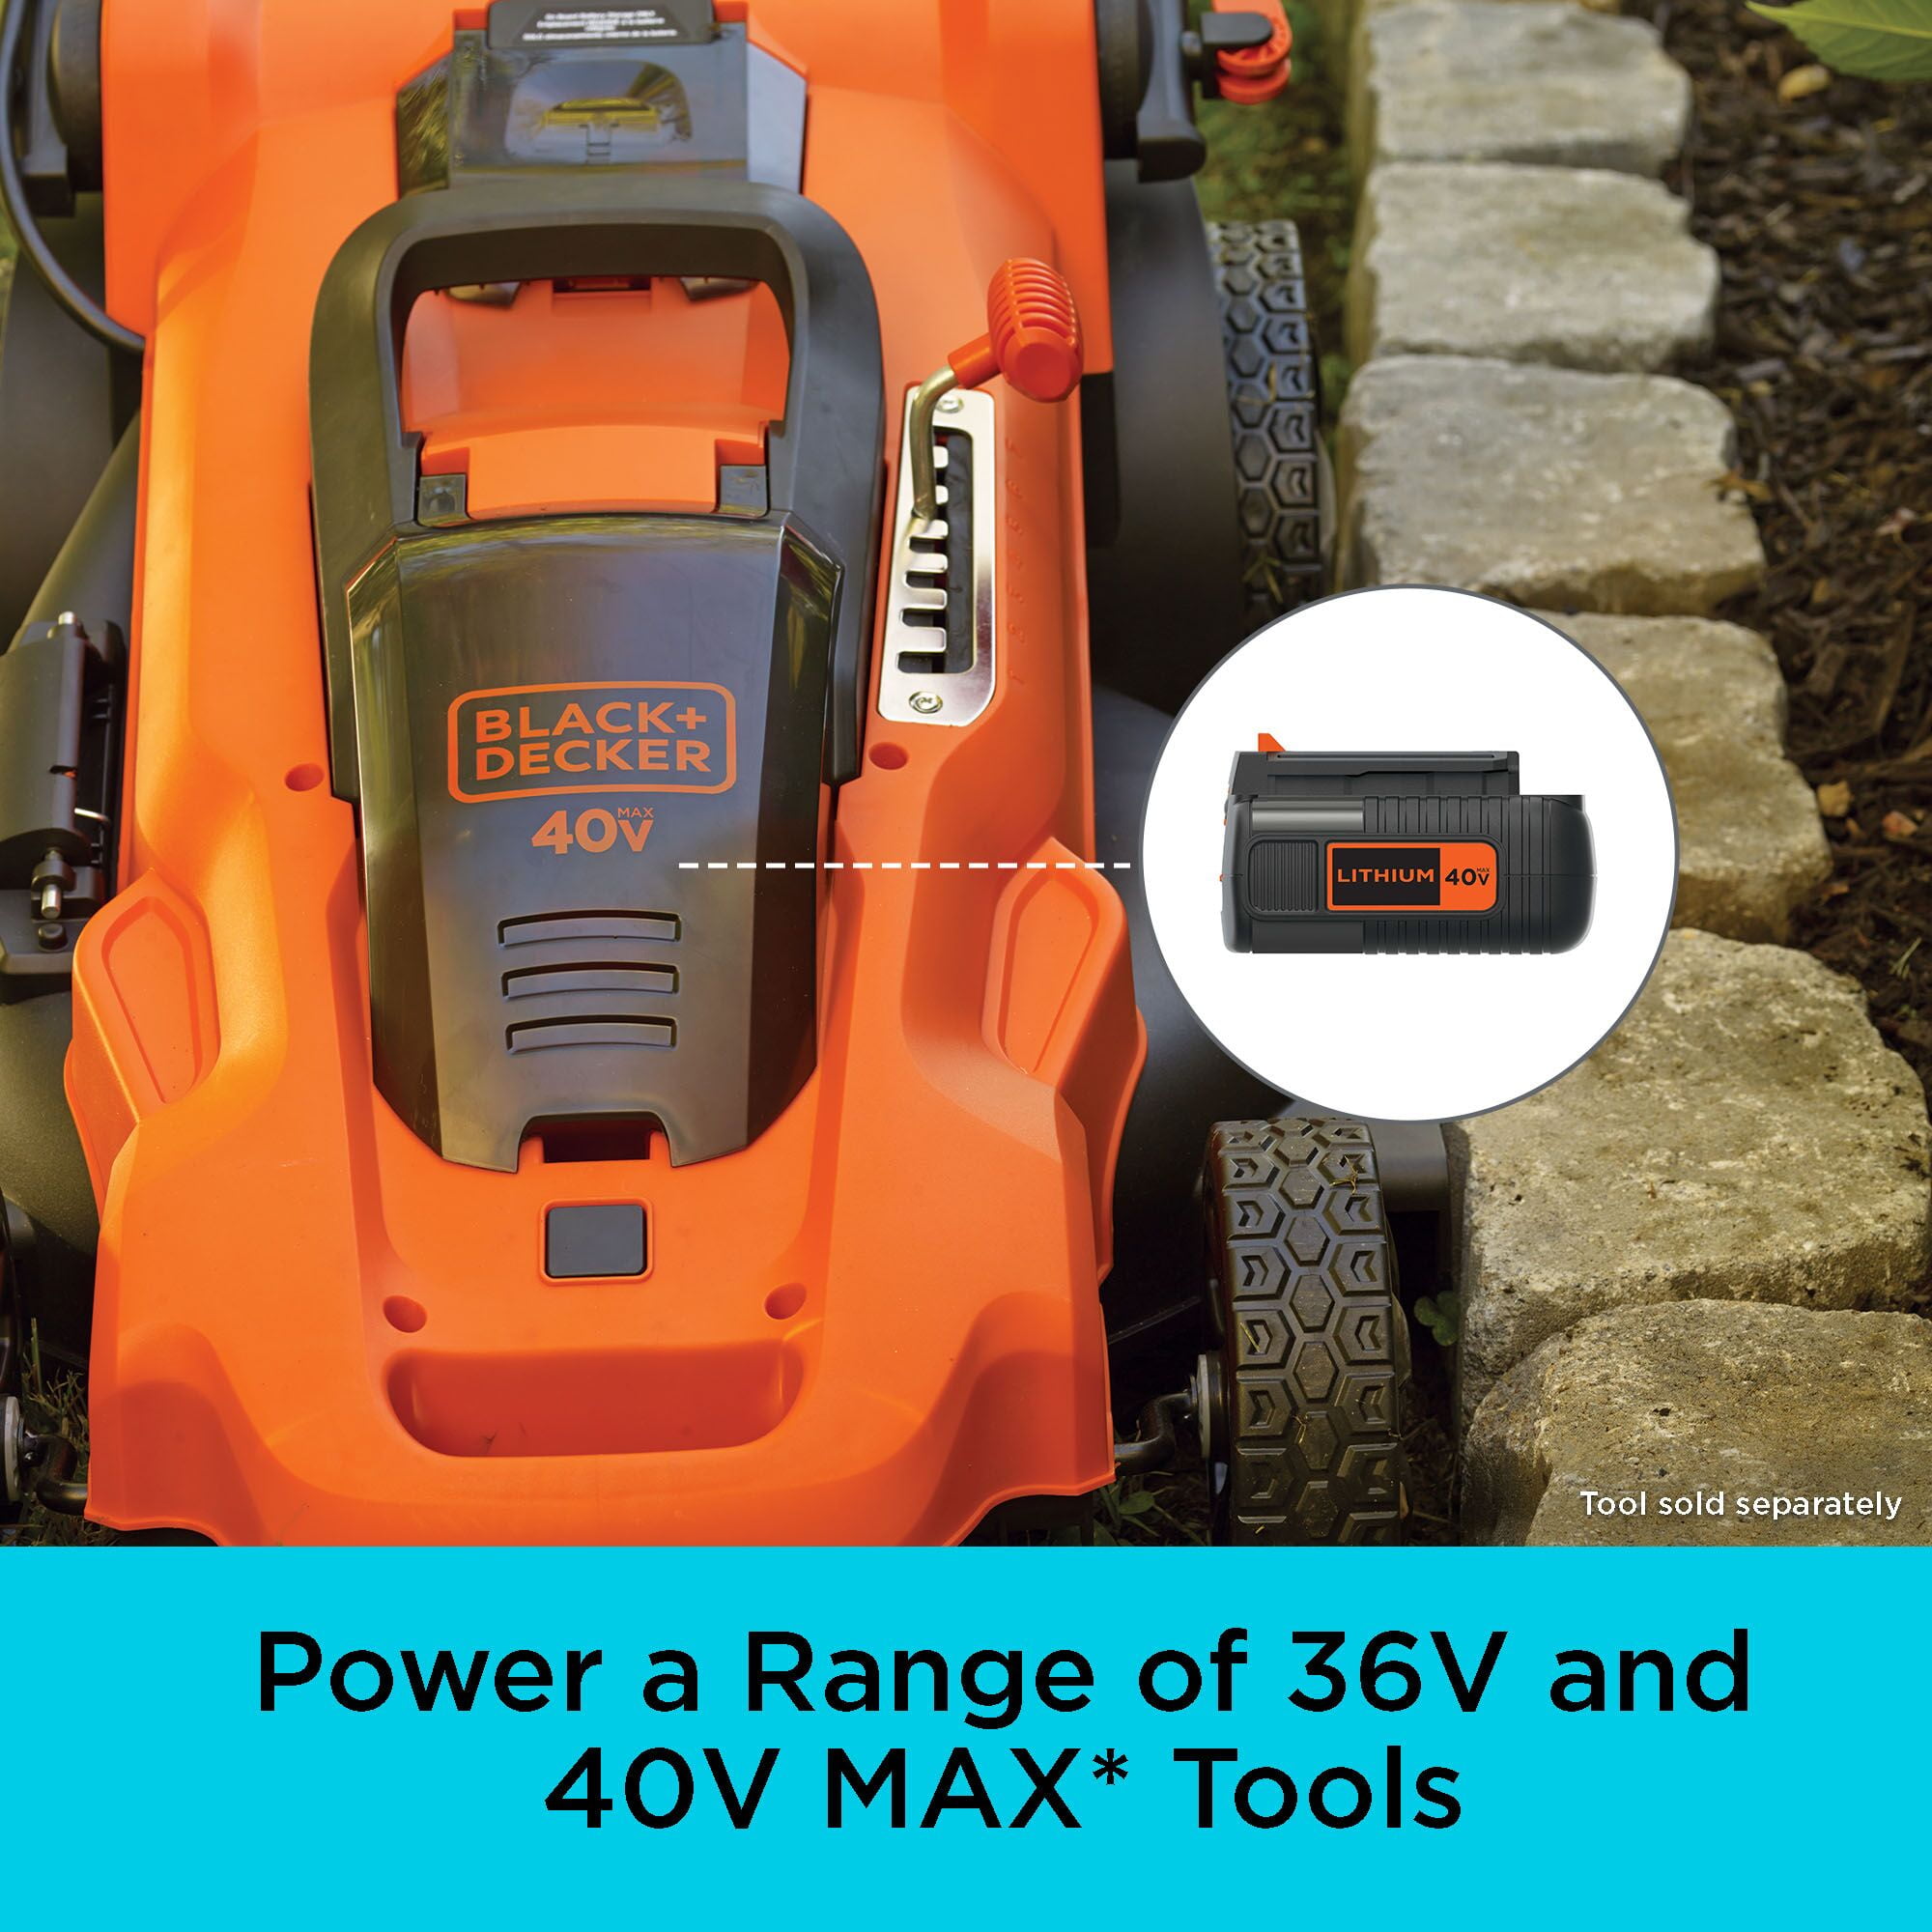  BLACK+DECKER 40V MAX Lithium Battery, Compatible with 36V and  40V MAX Power Tools, Lithium Ion Technology, Charger Not Included (LBX2040)  : Tools & Home Improvement